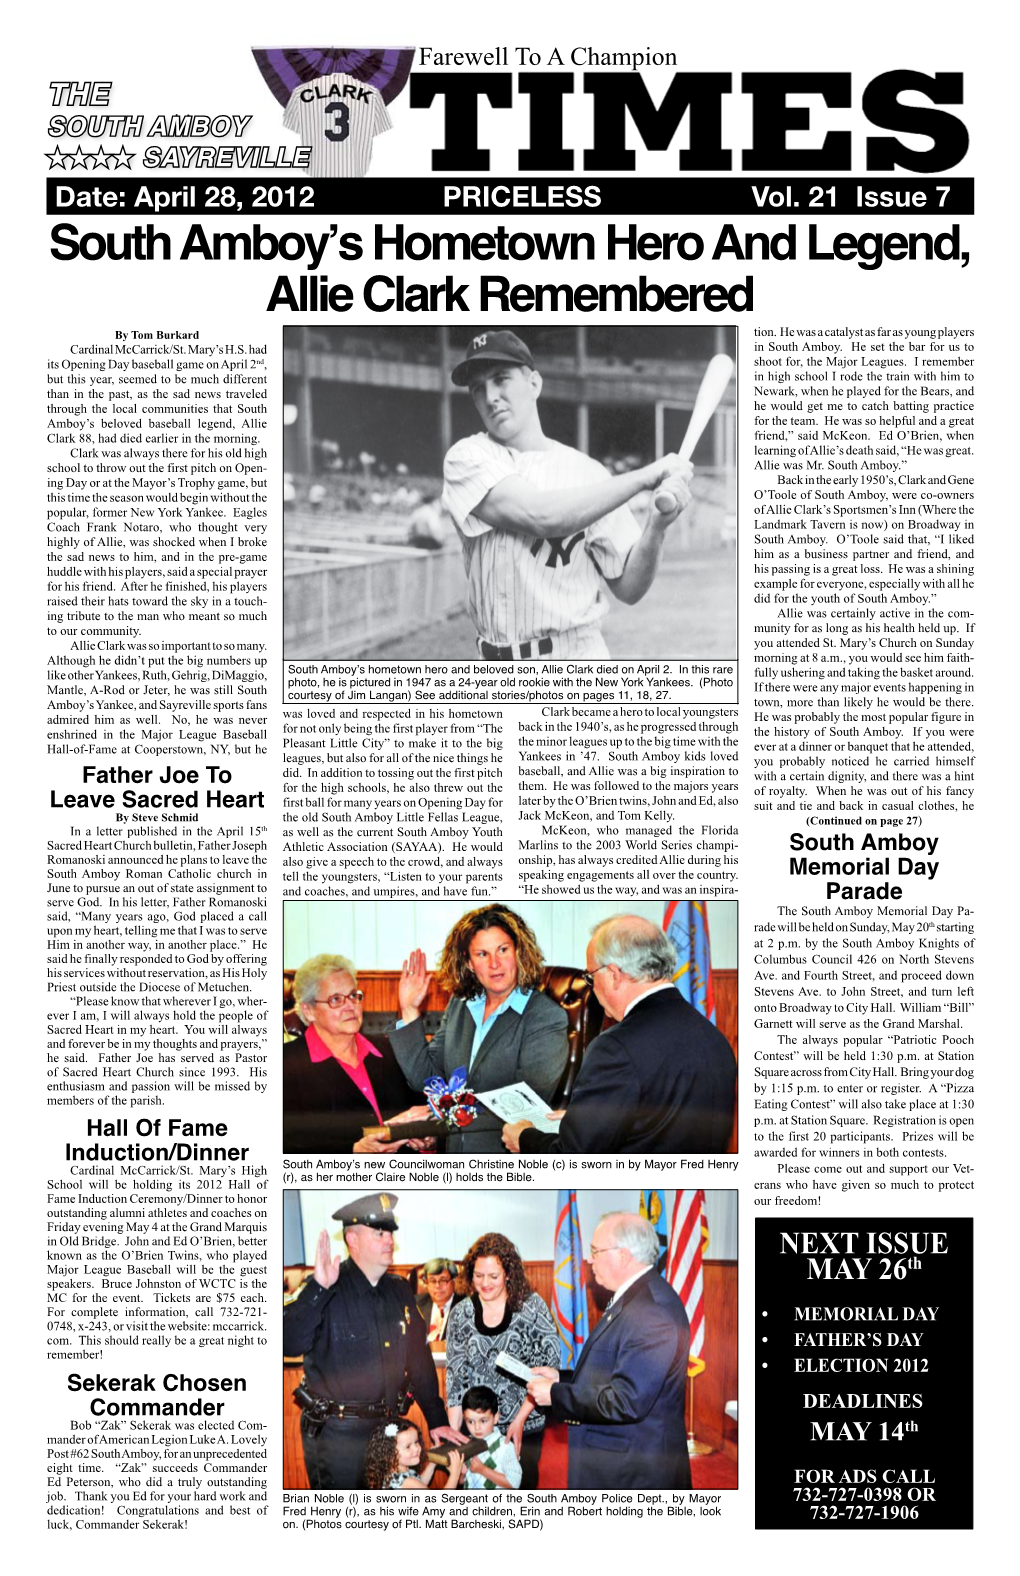 South Amboy's Hometown Hero and Legend, Allie Clark Remembered